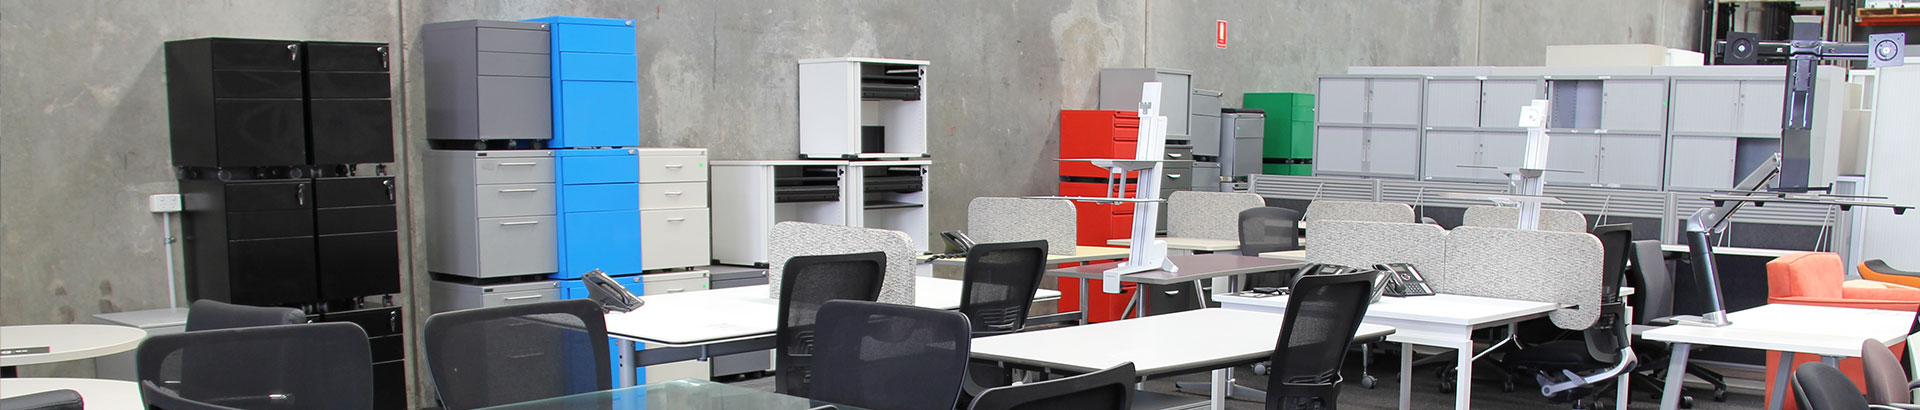 Contact Sustainable Office Solutions about selling office furniture